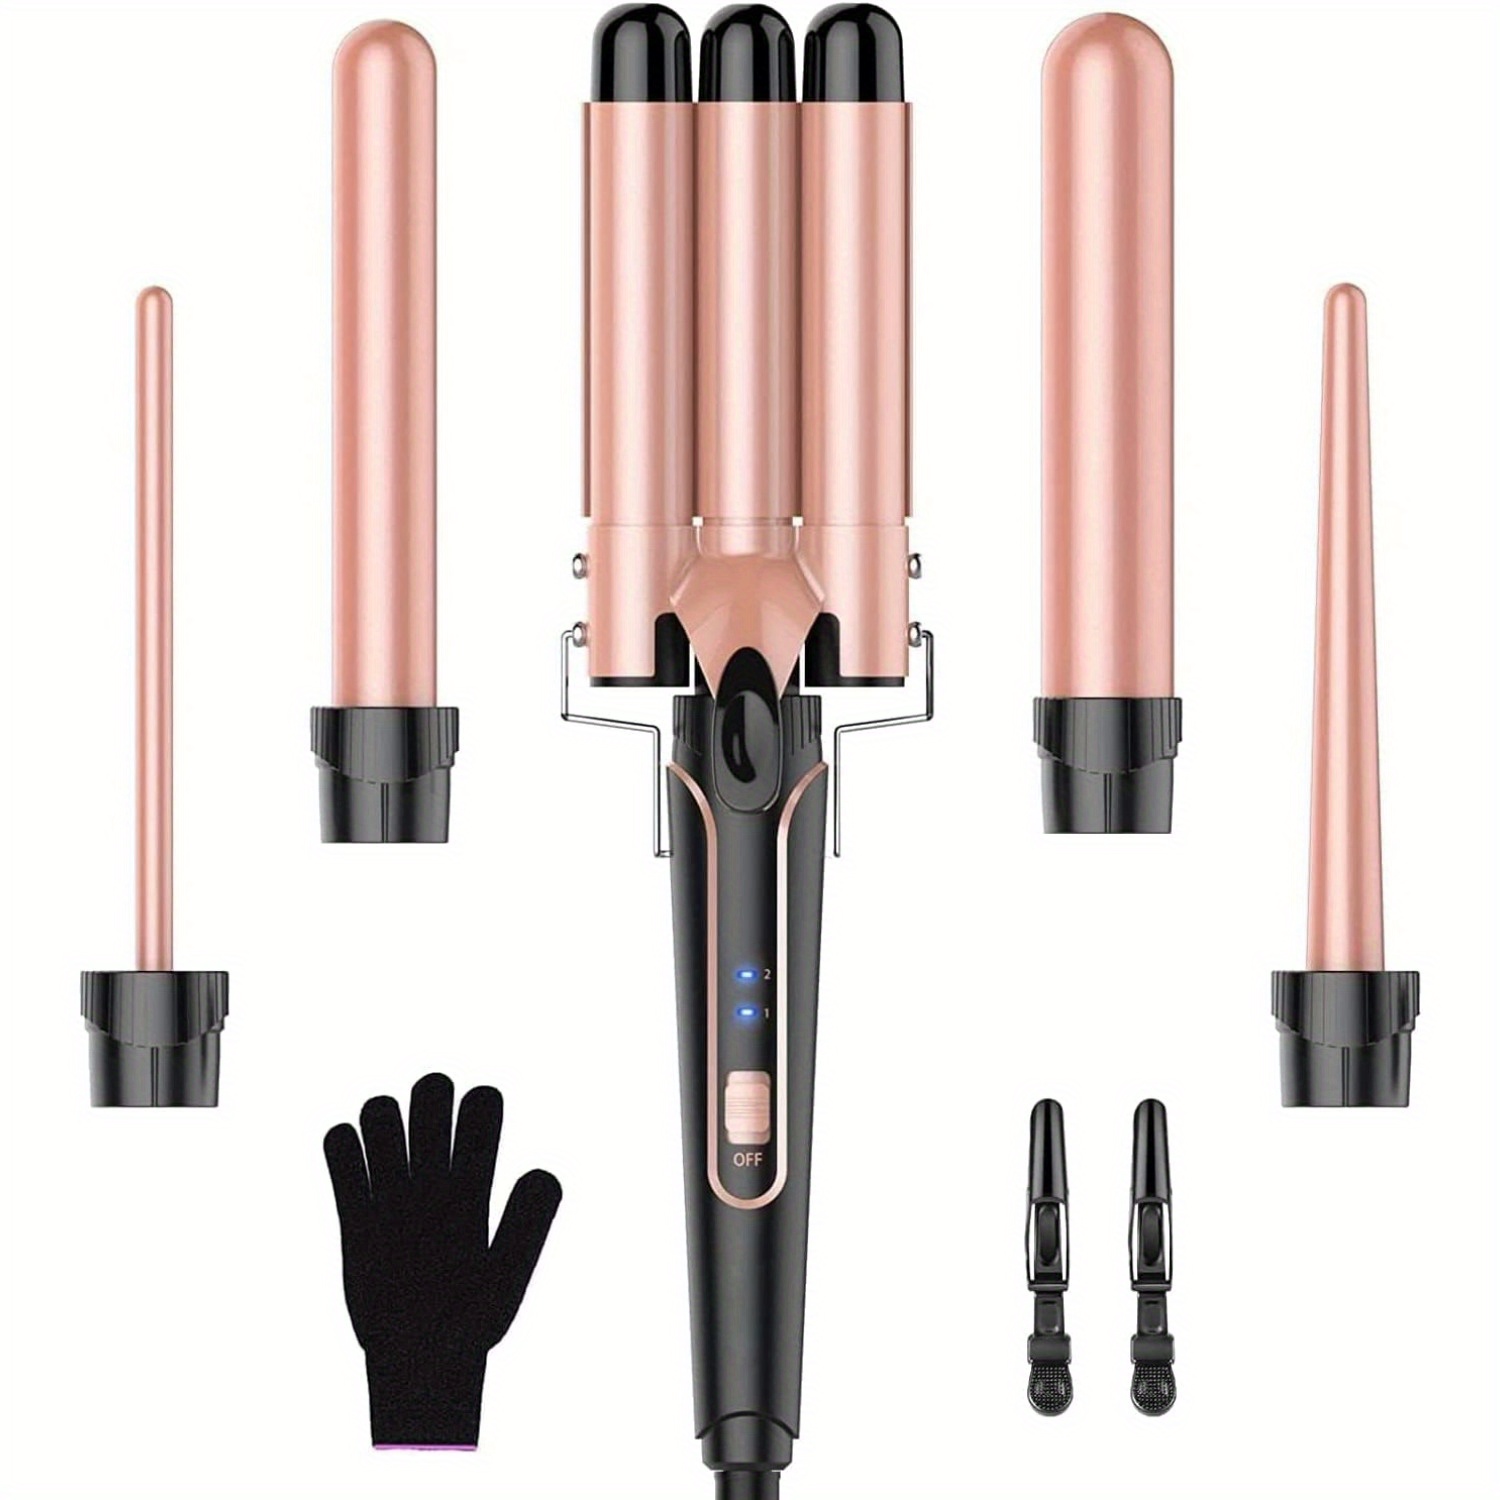 

Bestope Pro Set Curling Irons - Curling Irons 3 Barrels For Big No Curls Ceramic Curlers Different Attachments Temperature Setting Fast Heating Glove 2 Clips Rose Gold 5 In 1